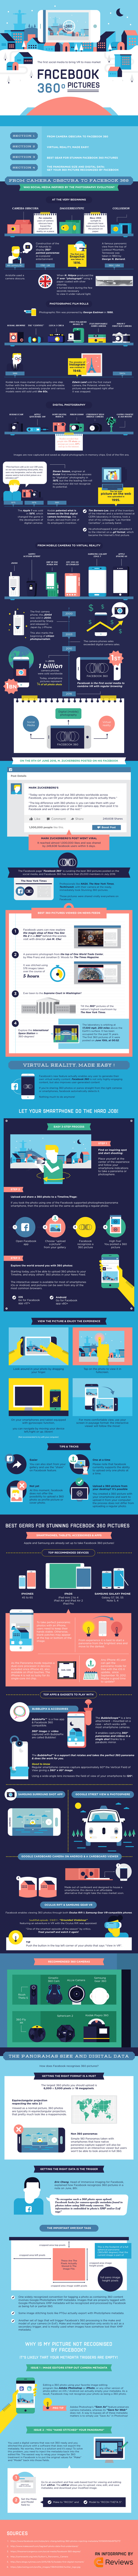 Facebook360-howto-infographic-ereviews-final-01